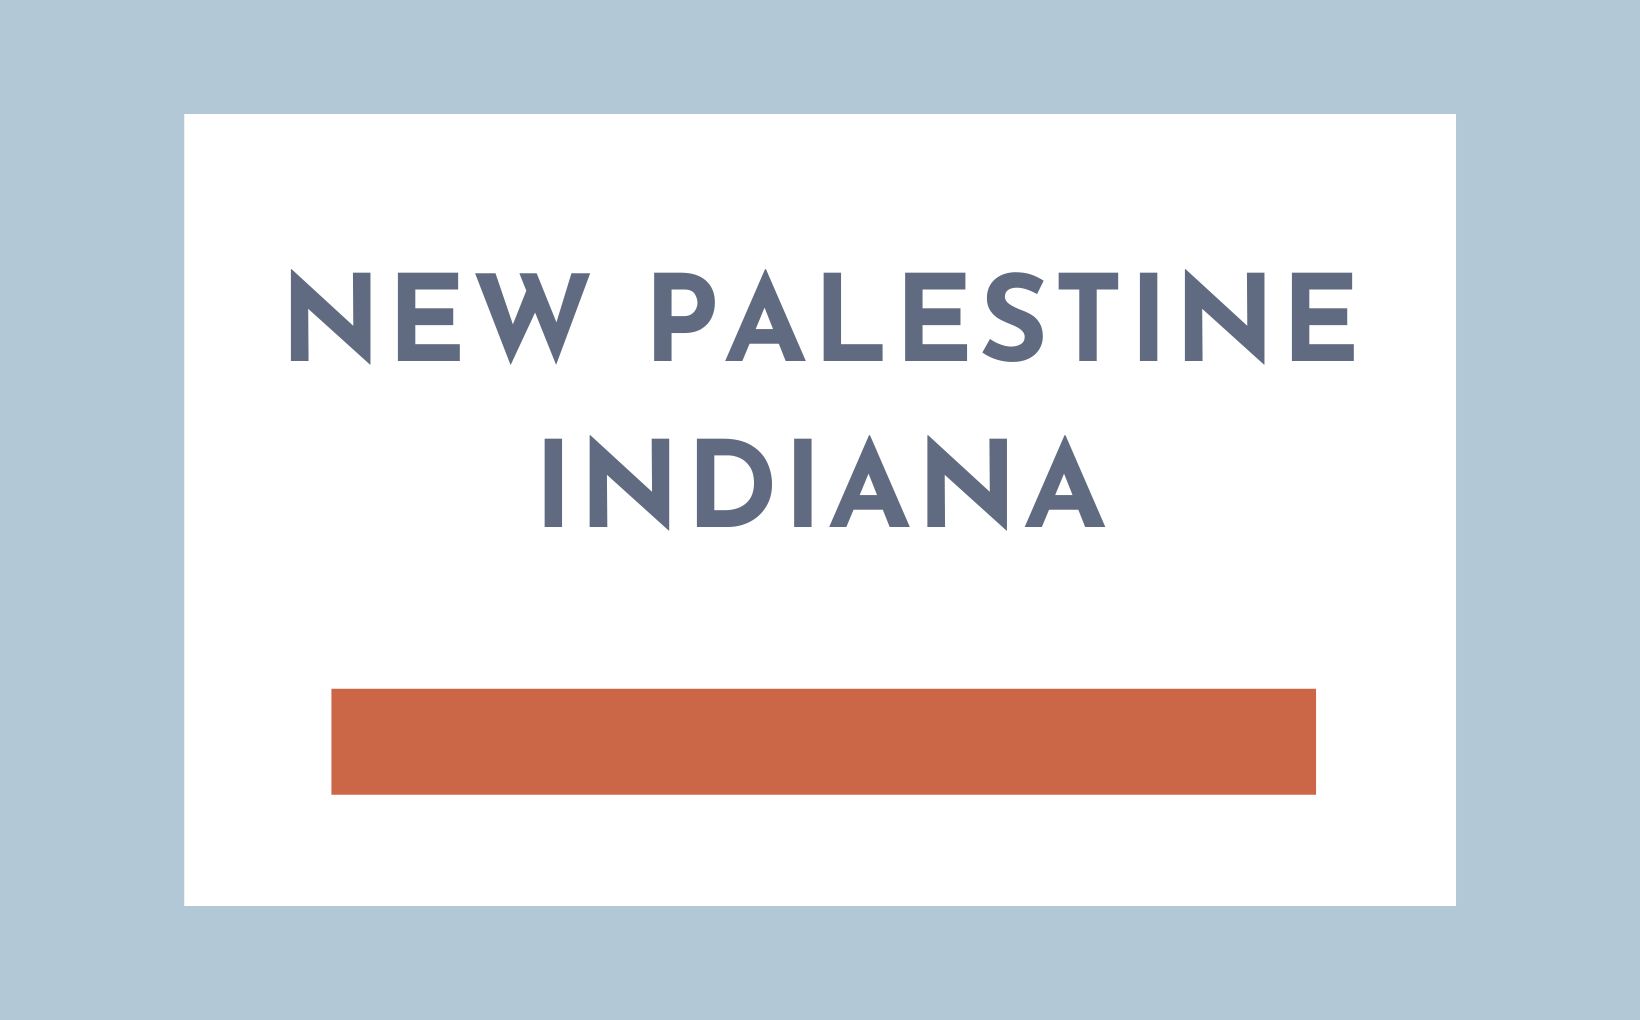 New Palestine Indiana feature image